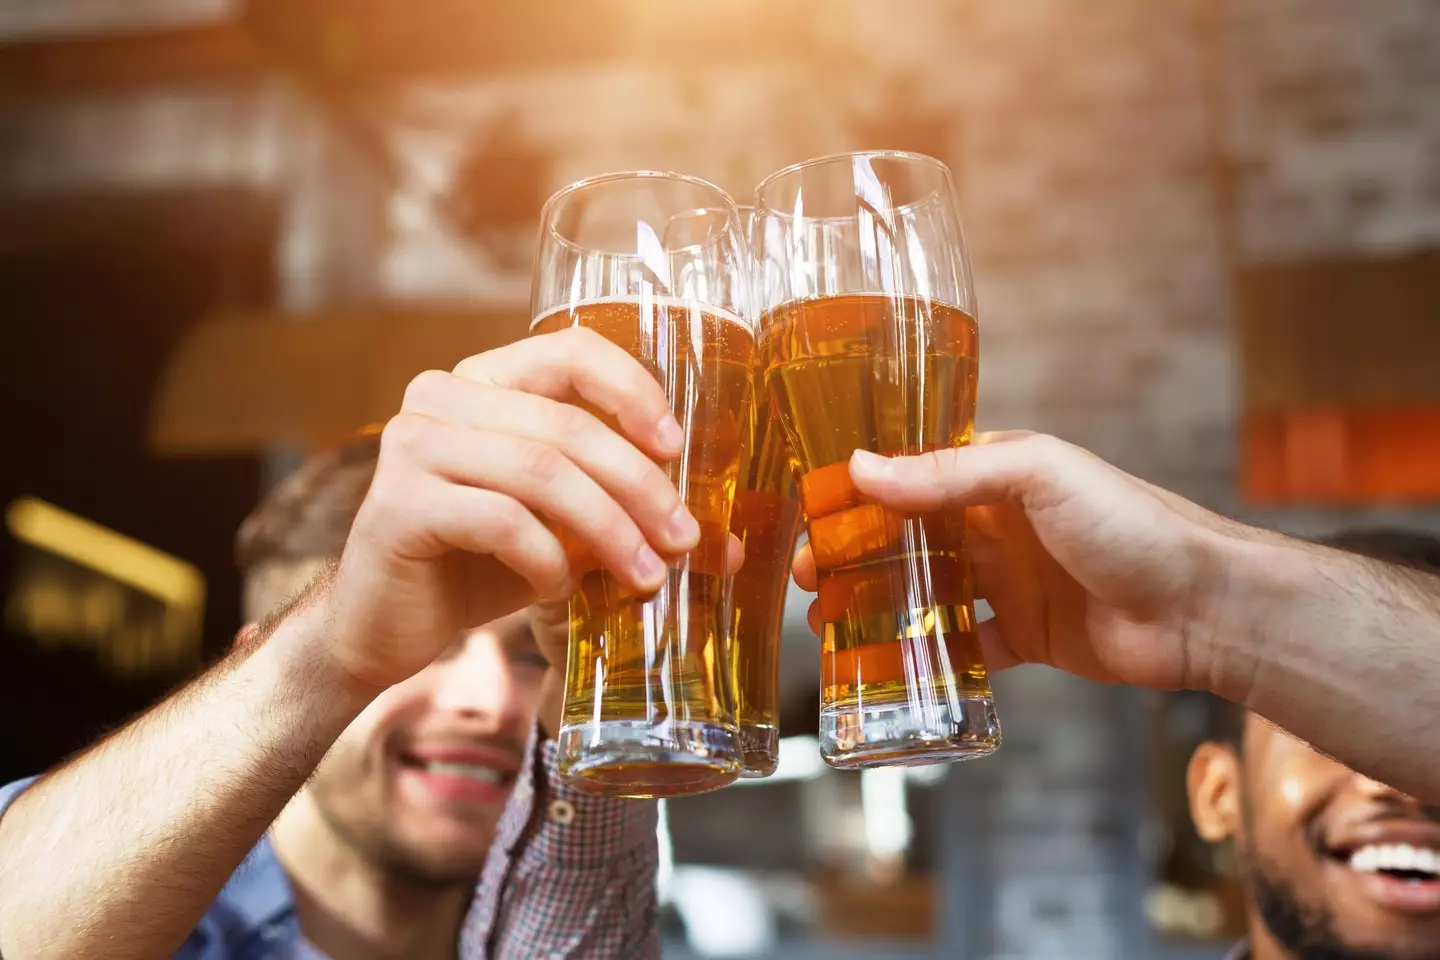 Brits are only just discovering that it's considered rude to clink beer glasses when abroad.